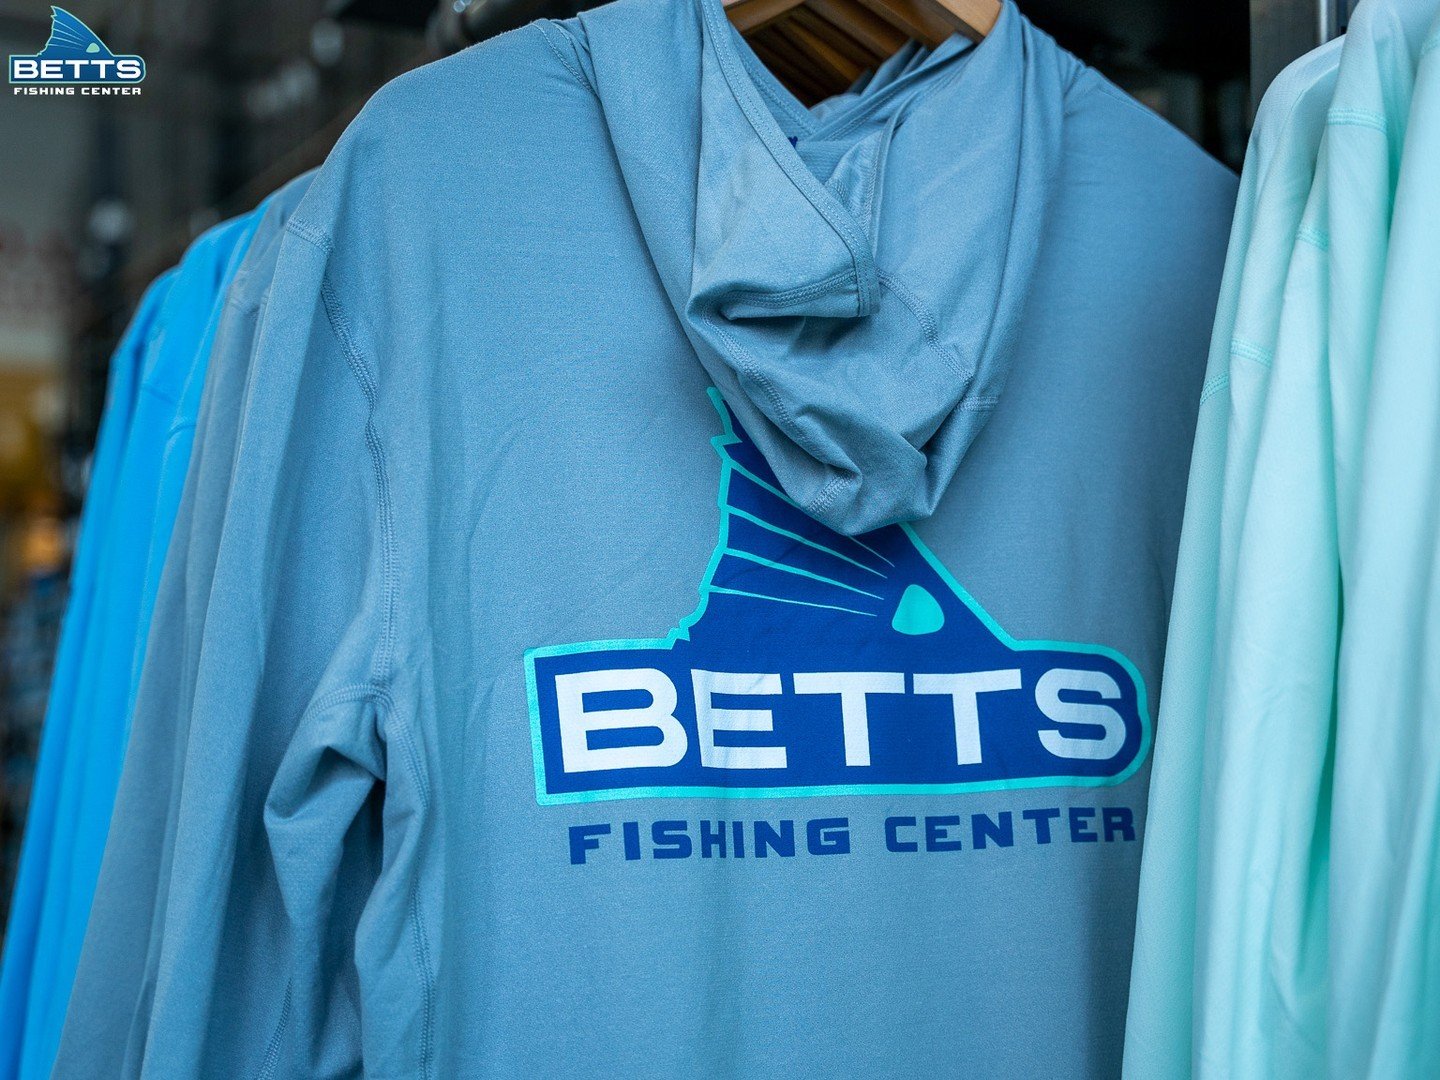 At Betts Fishing Center, our apparel selection leaves nothing to be desired! Whether it's Aftco, OluKai, Marsh Wear, or our own branded gear, we've got you covered with top-notch performance wear. Dive into our collection today and gear up for your n